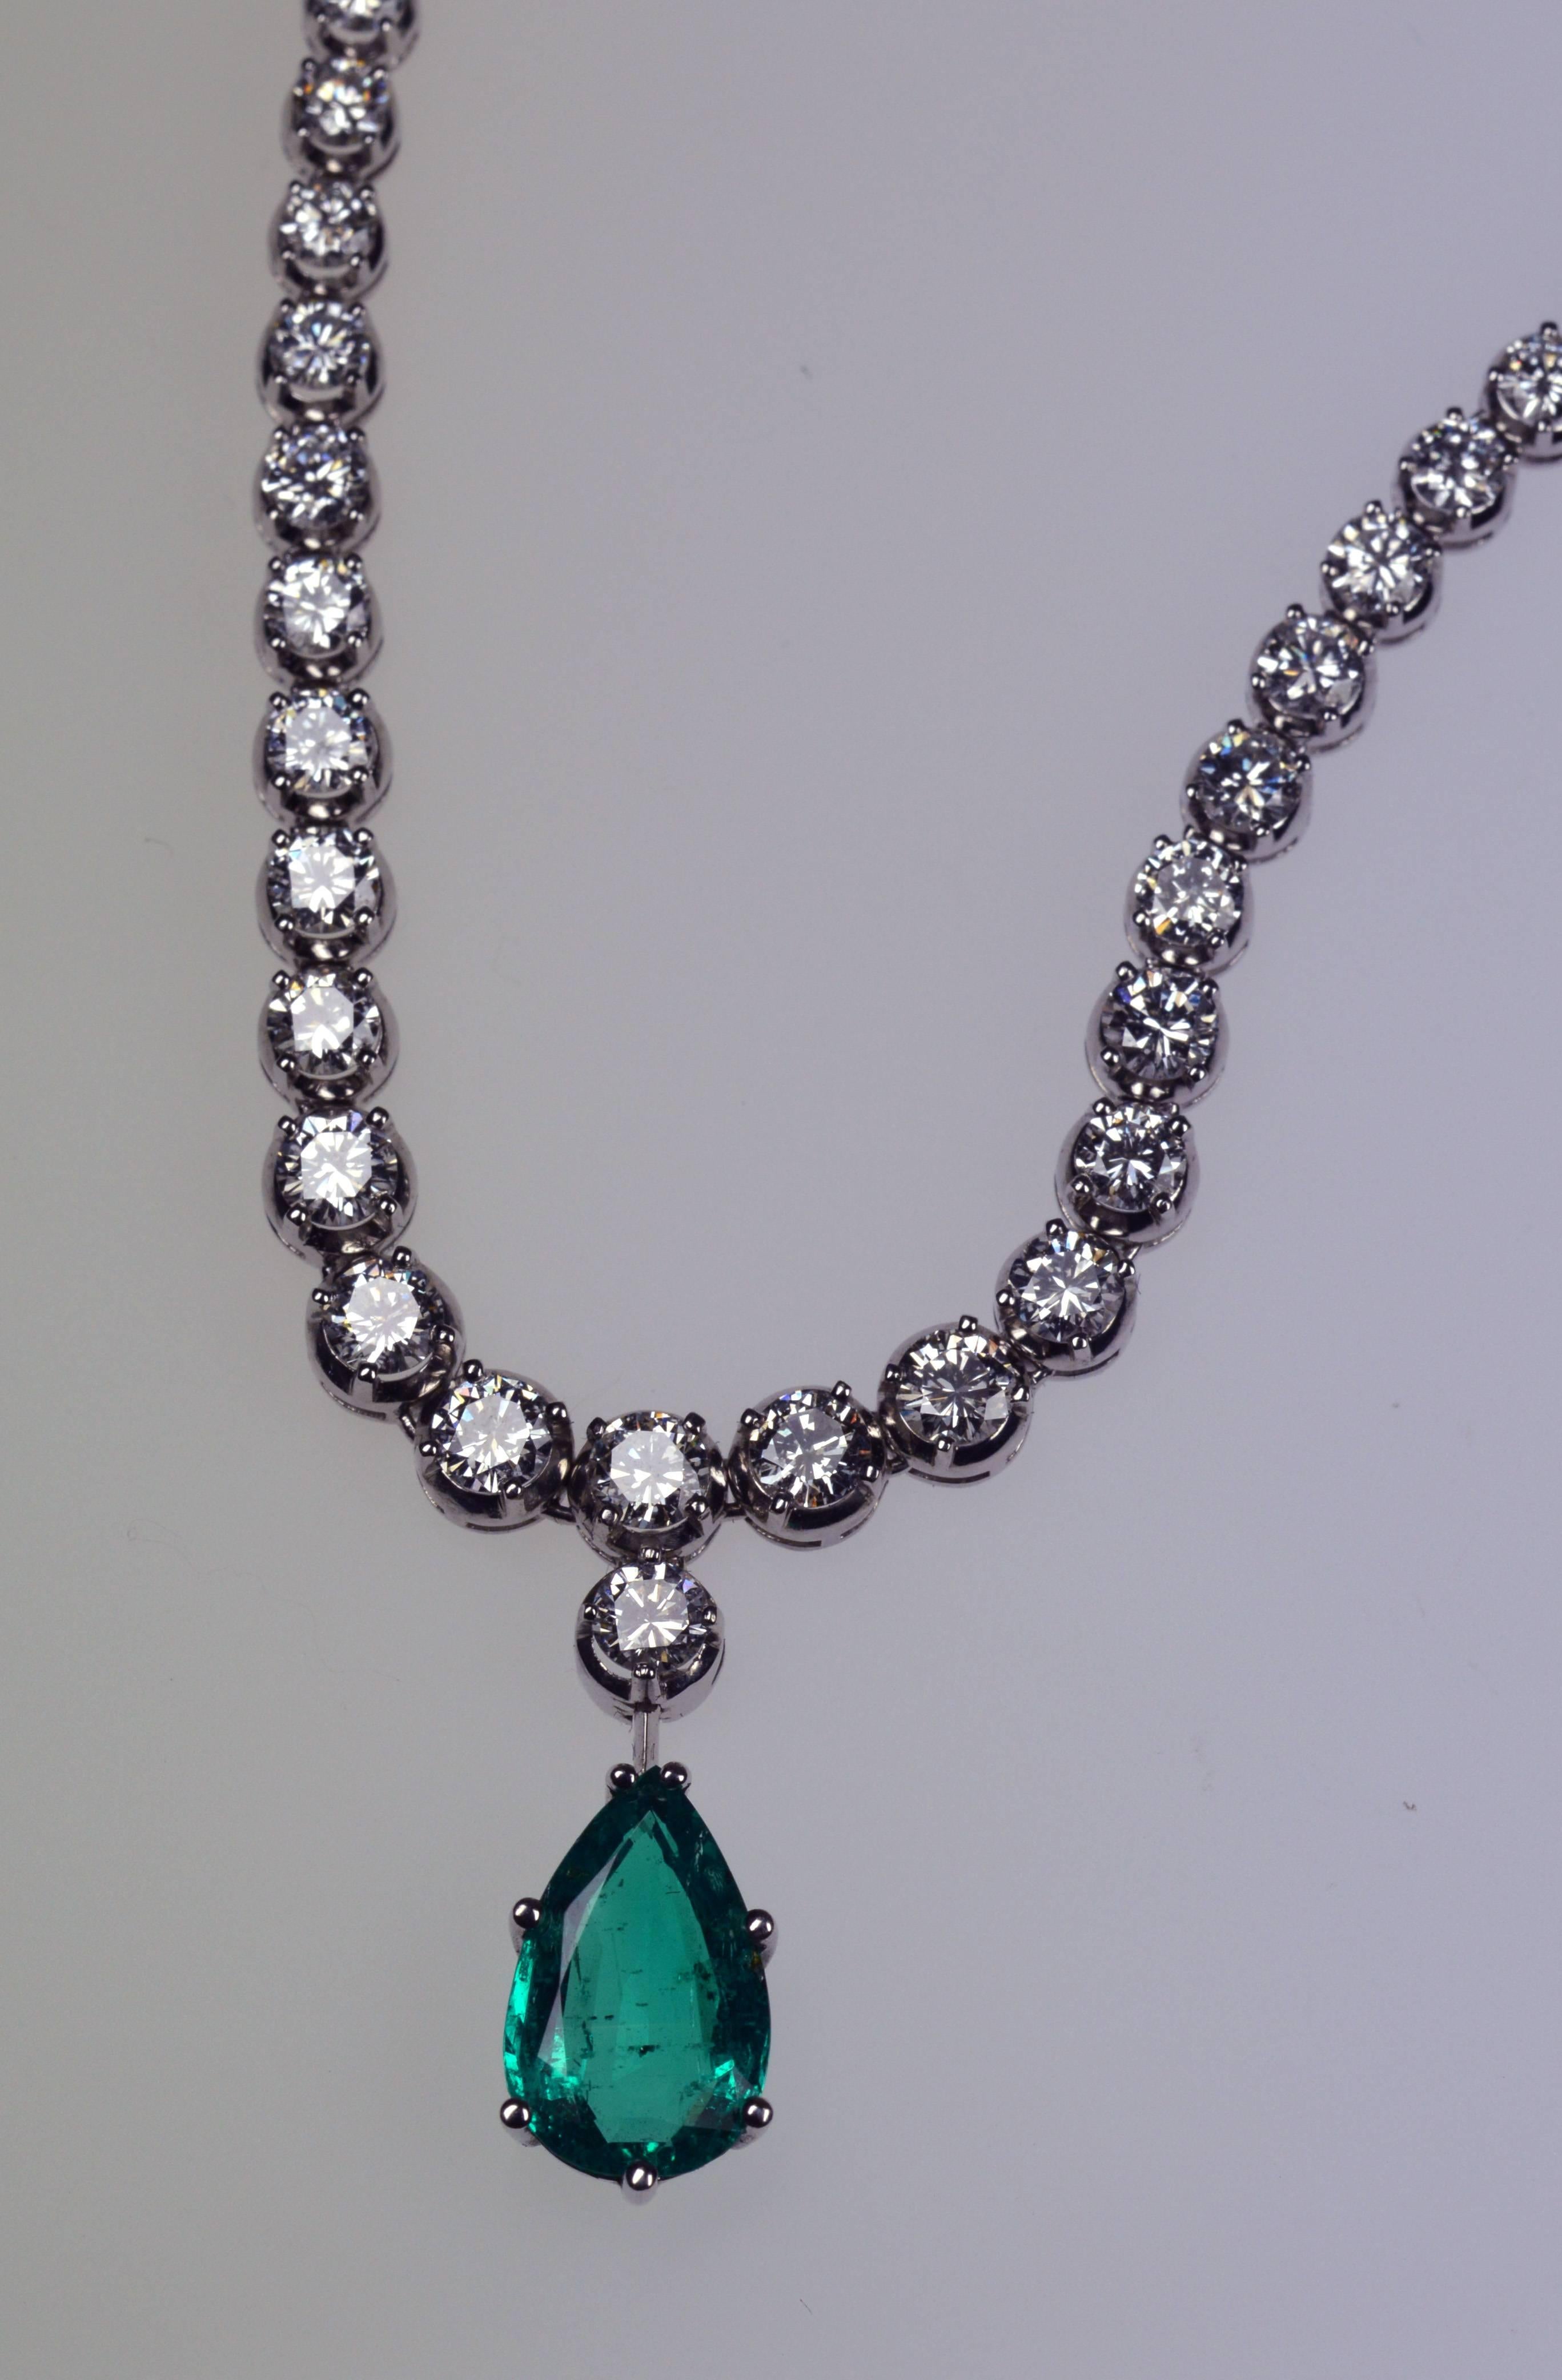 Elegant necklace with a pearshape emerald approx. 3.47ct. Colombia minor oil, rivière necklace with 103 round diamonds total weight ca. 9.88ct.
Quality of diamonds: F-G color, VVS clarity. In 18K white gold
with SSEF report 